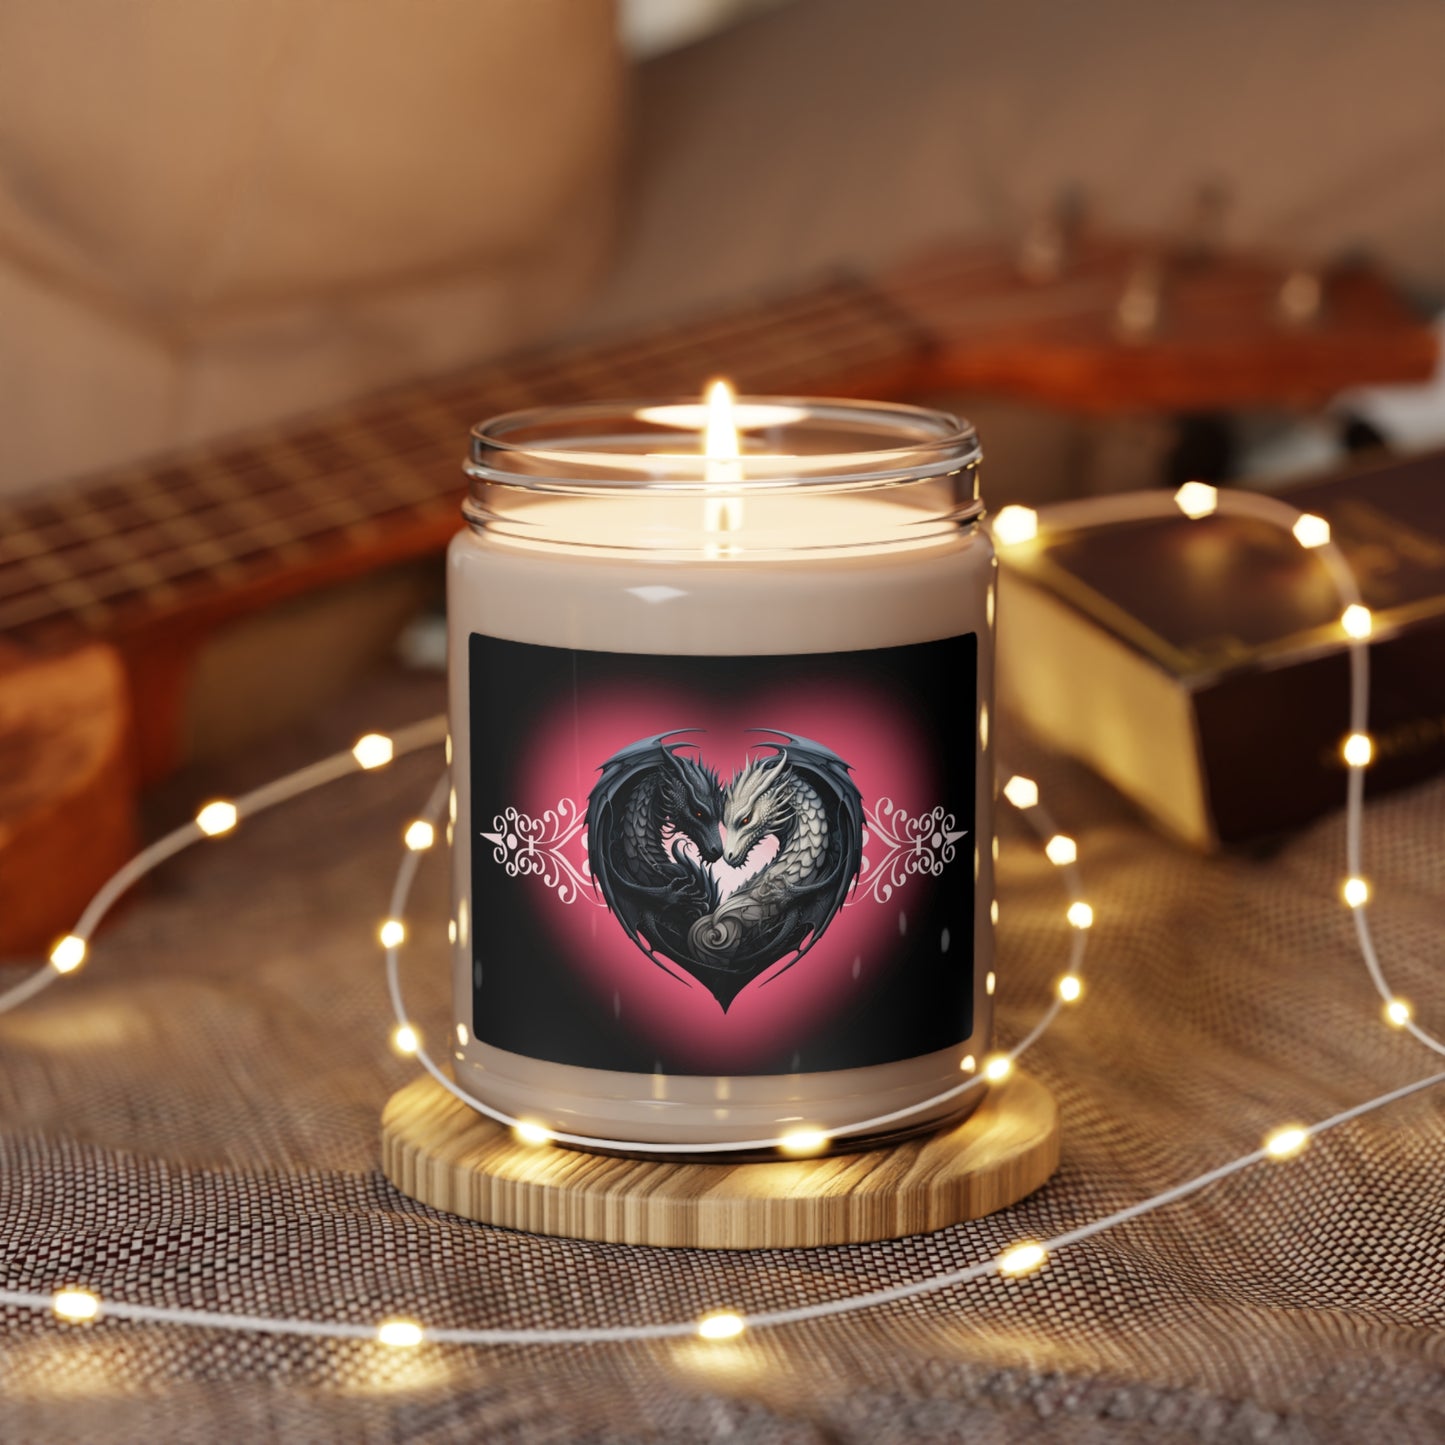 Dragon Love White Heart Scented Soy Candle, 9oz